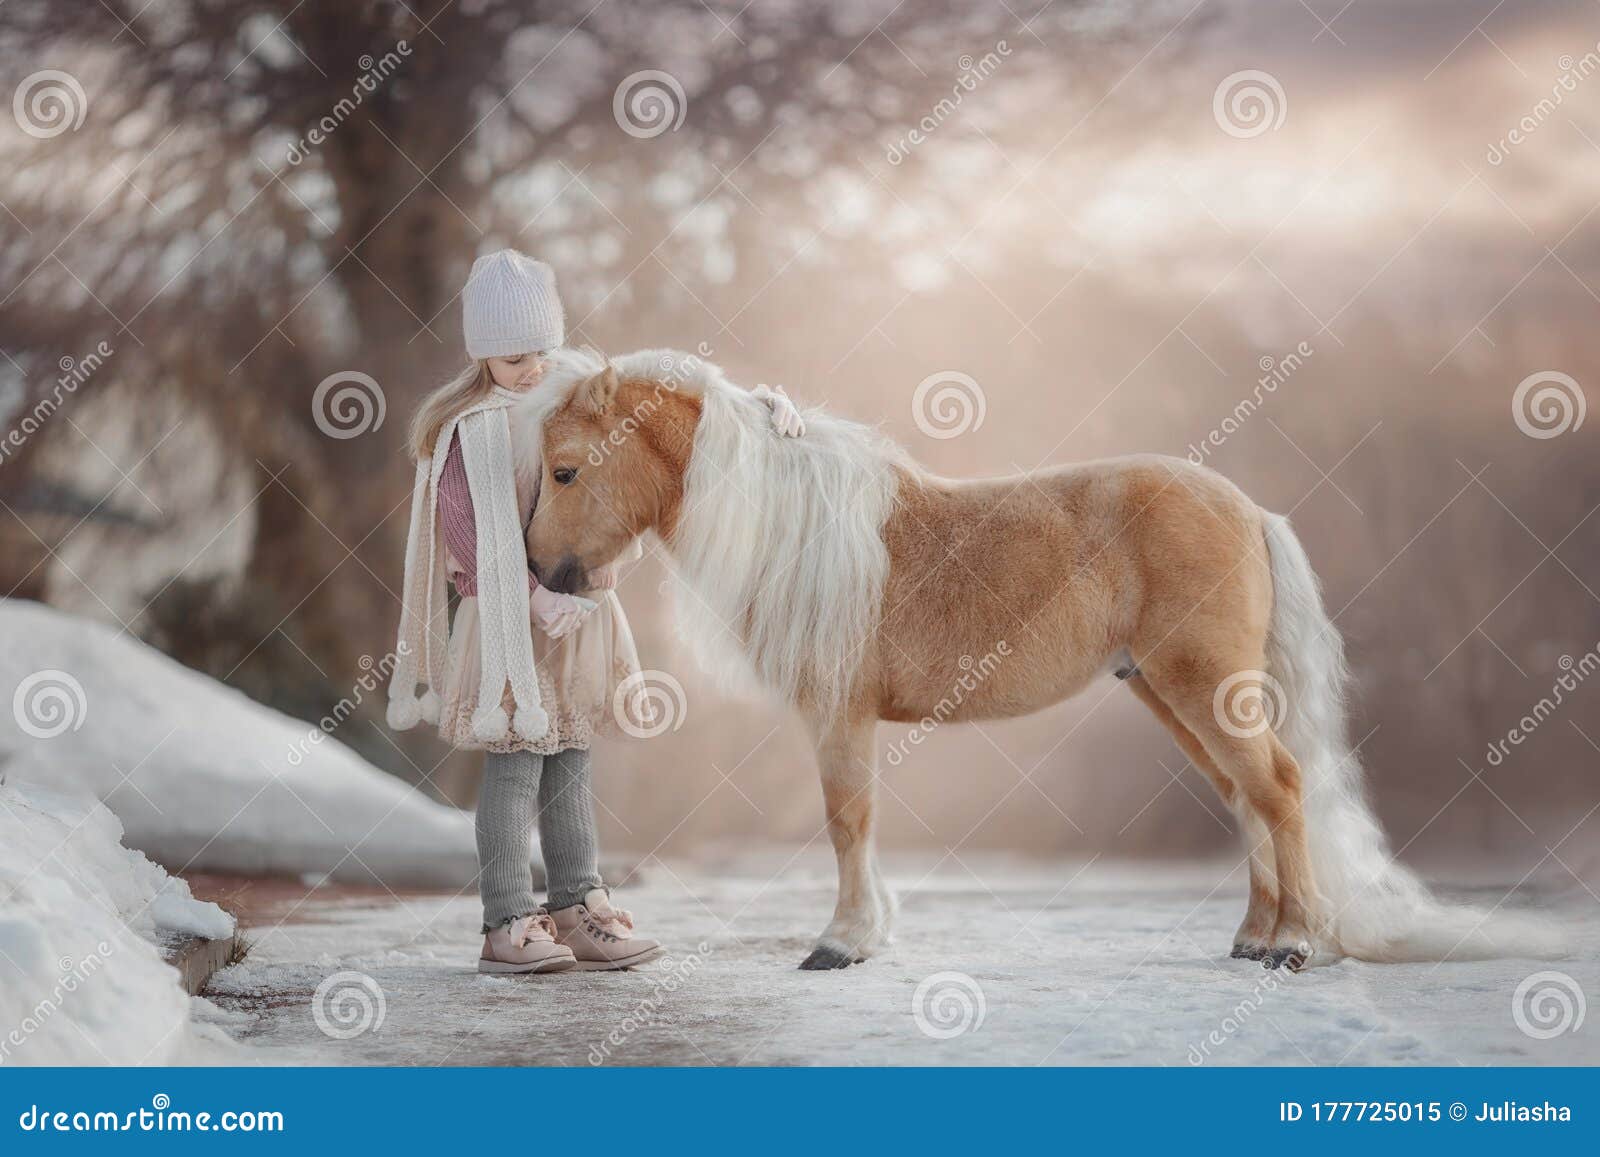 little girl with palomino miniature horse in winter park